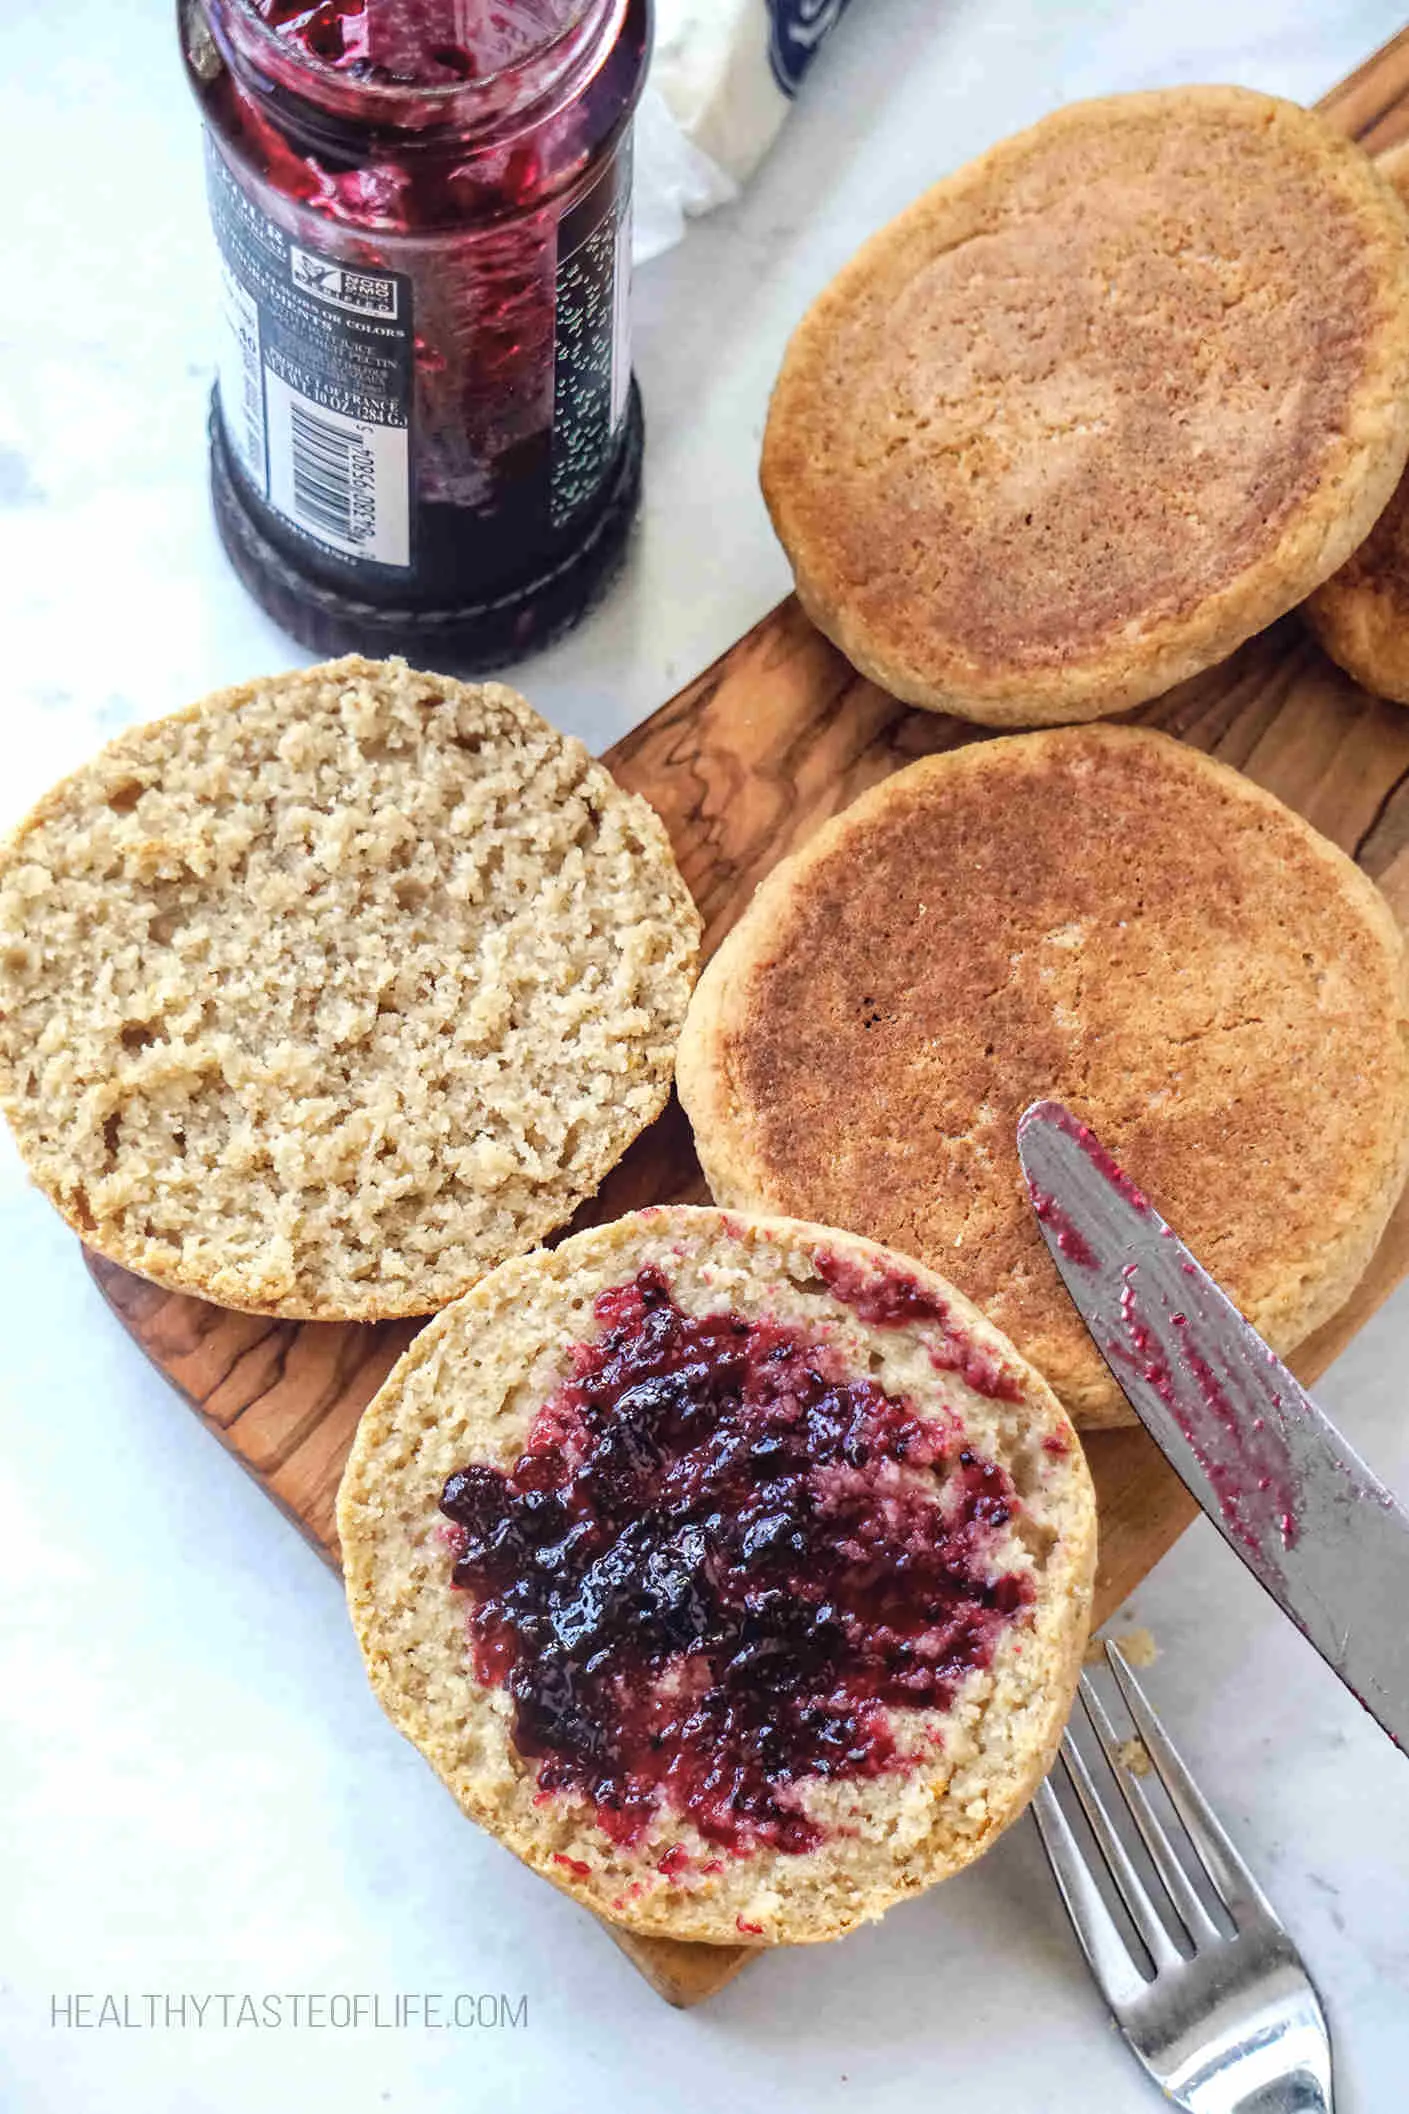 Skinny gluten free English muffins with black currant jam